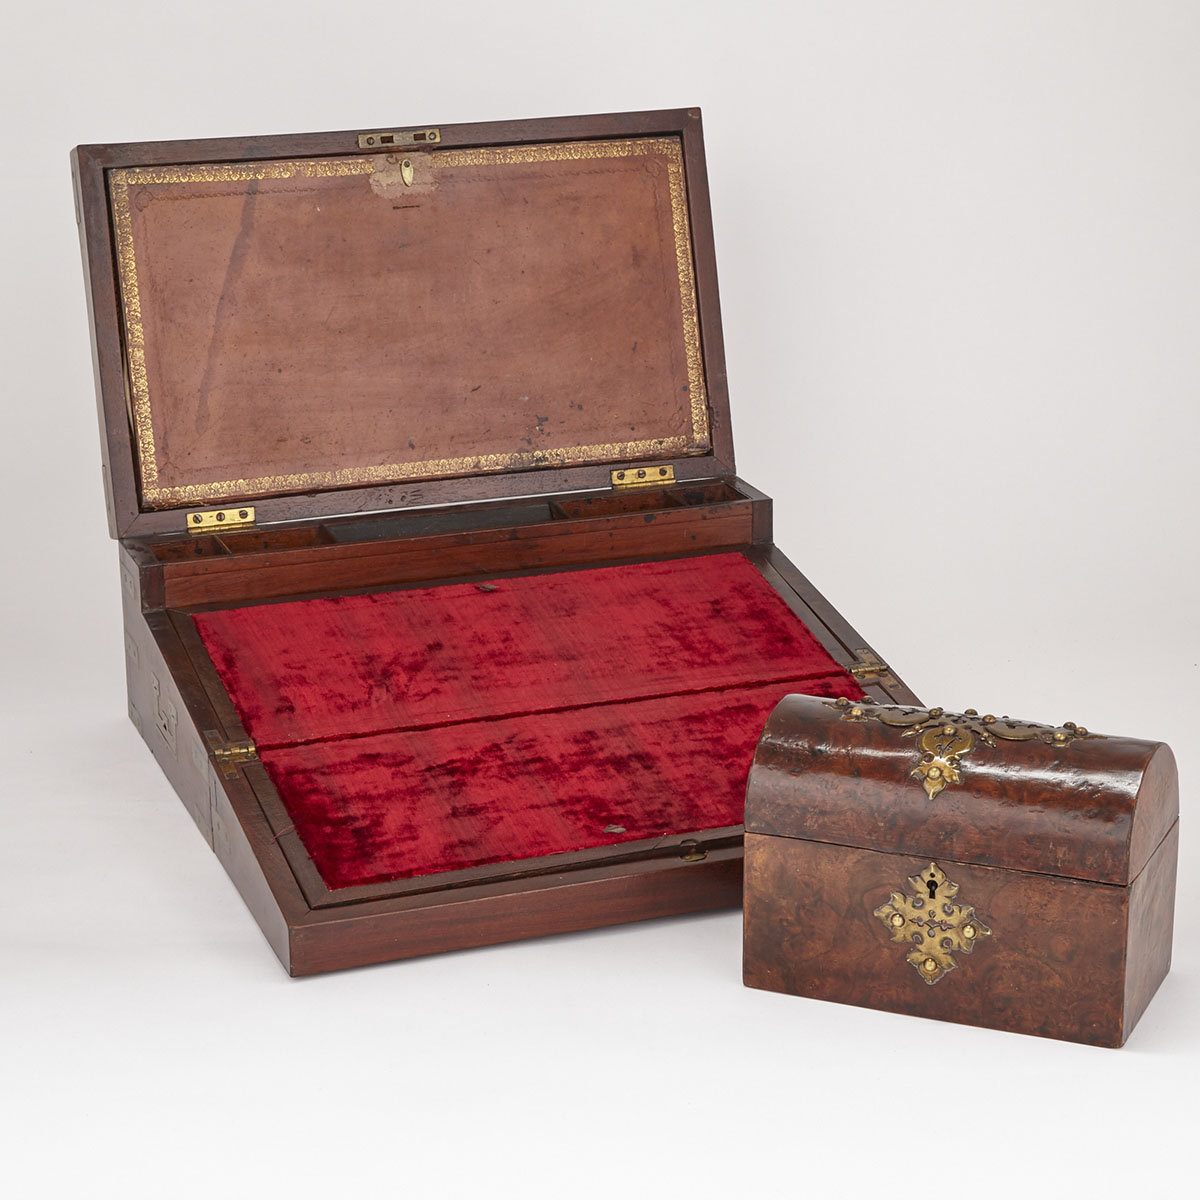 Victorian Brass Bound Mahogany Campaign Style Writing Slope Together with a Burl Walnut Domed Stationary Box, 19th century